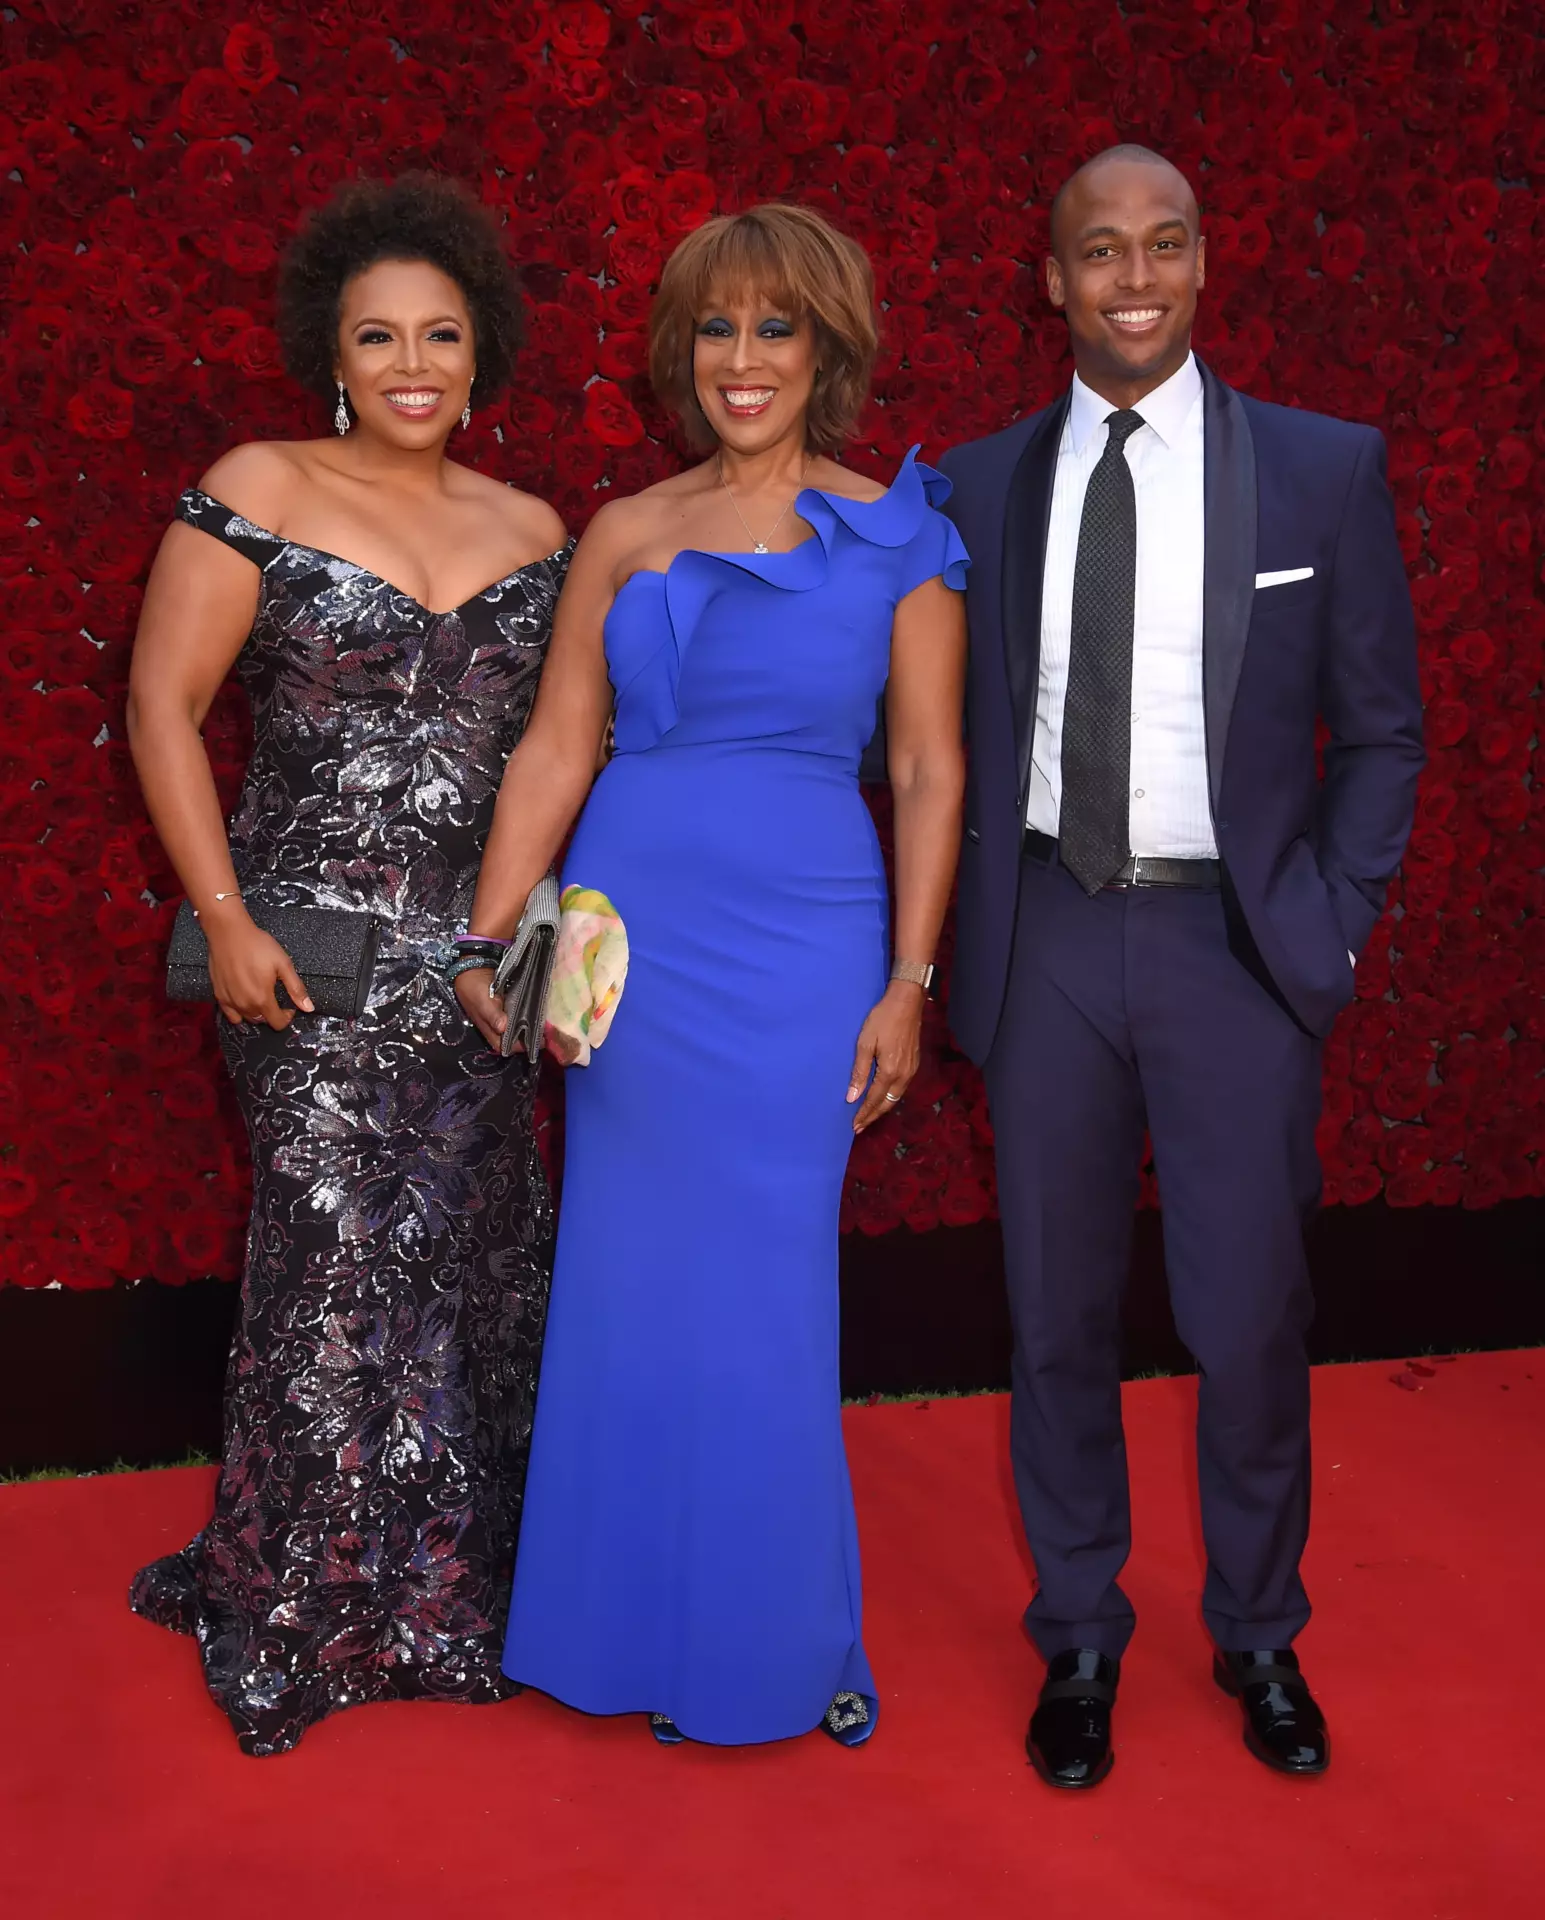 Gayle King's children and her